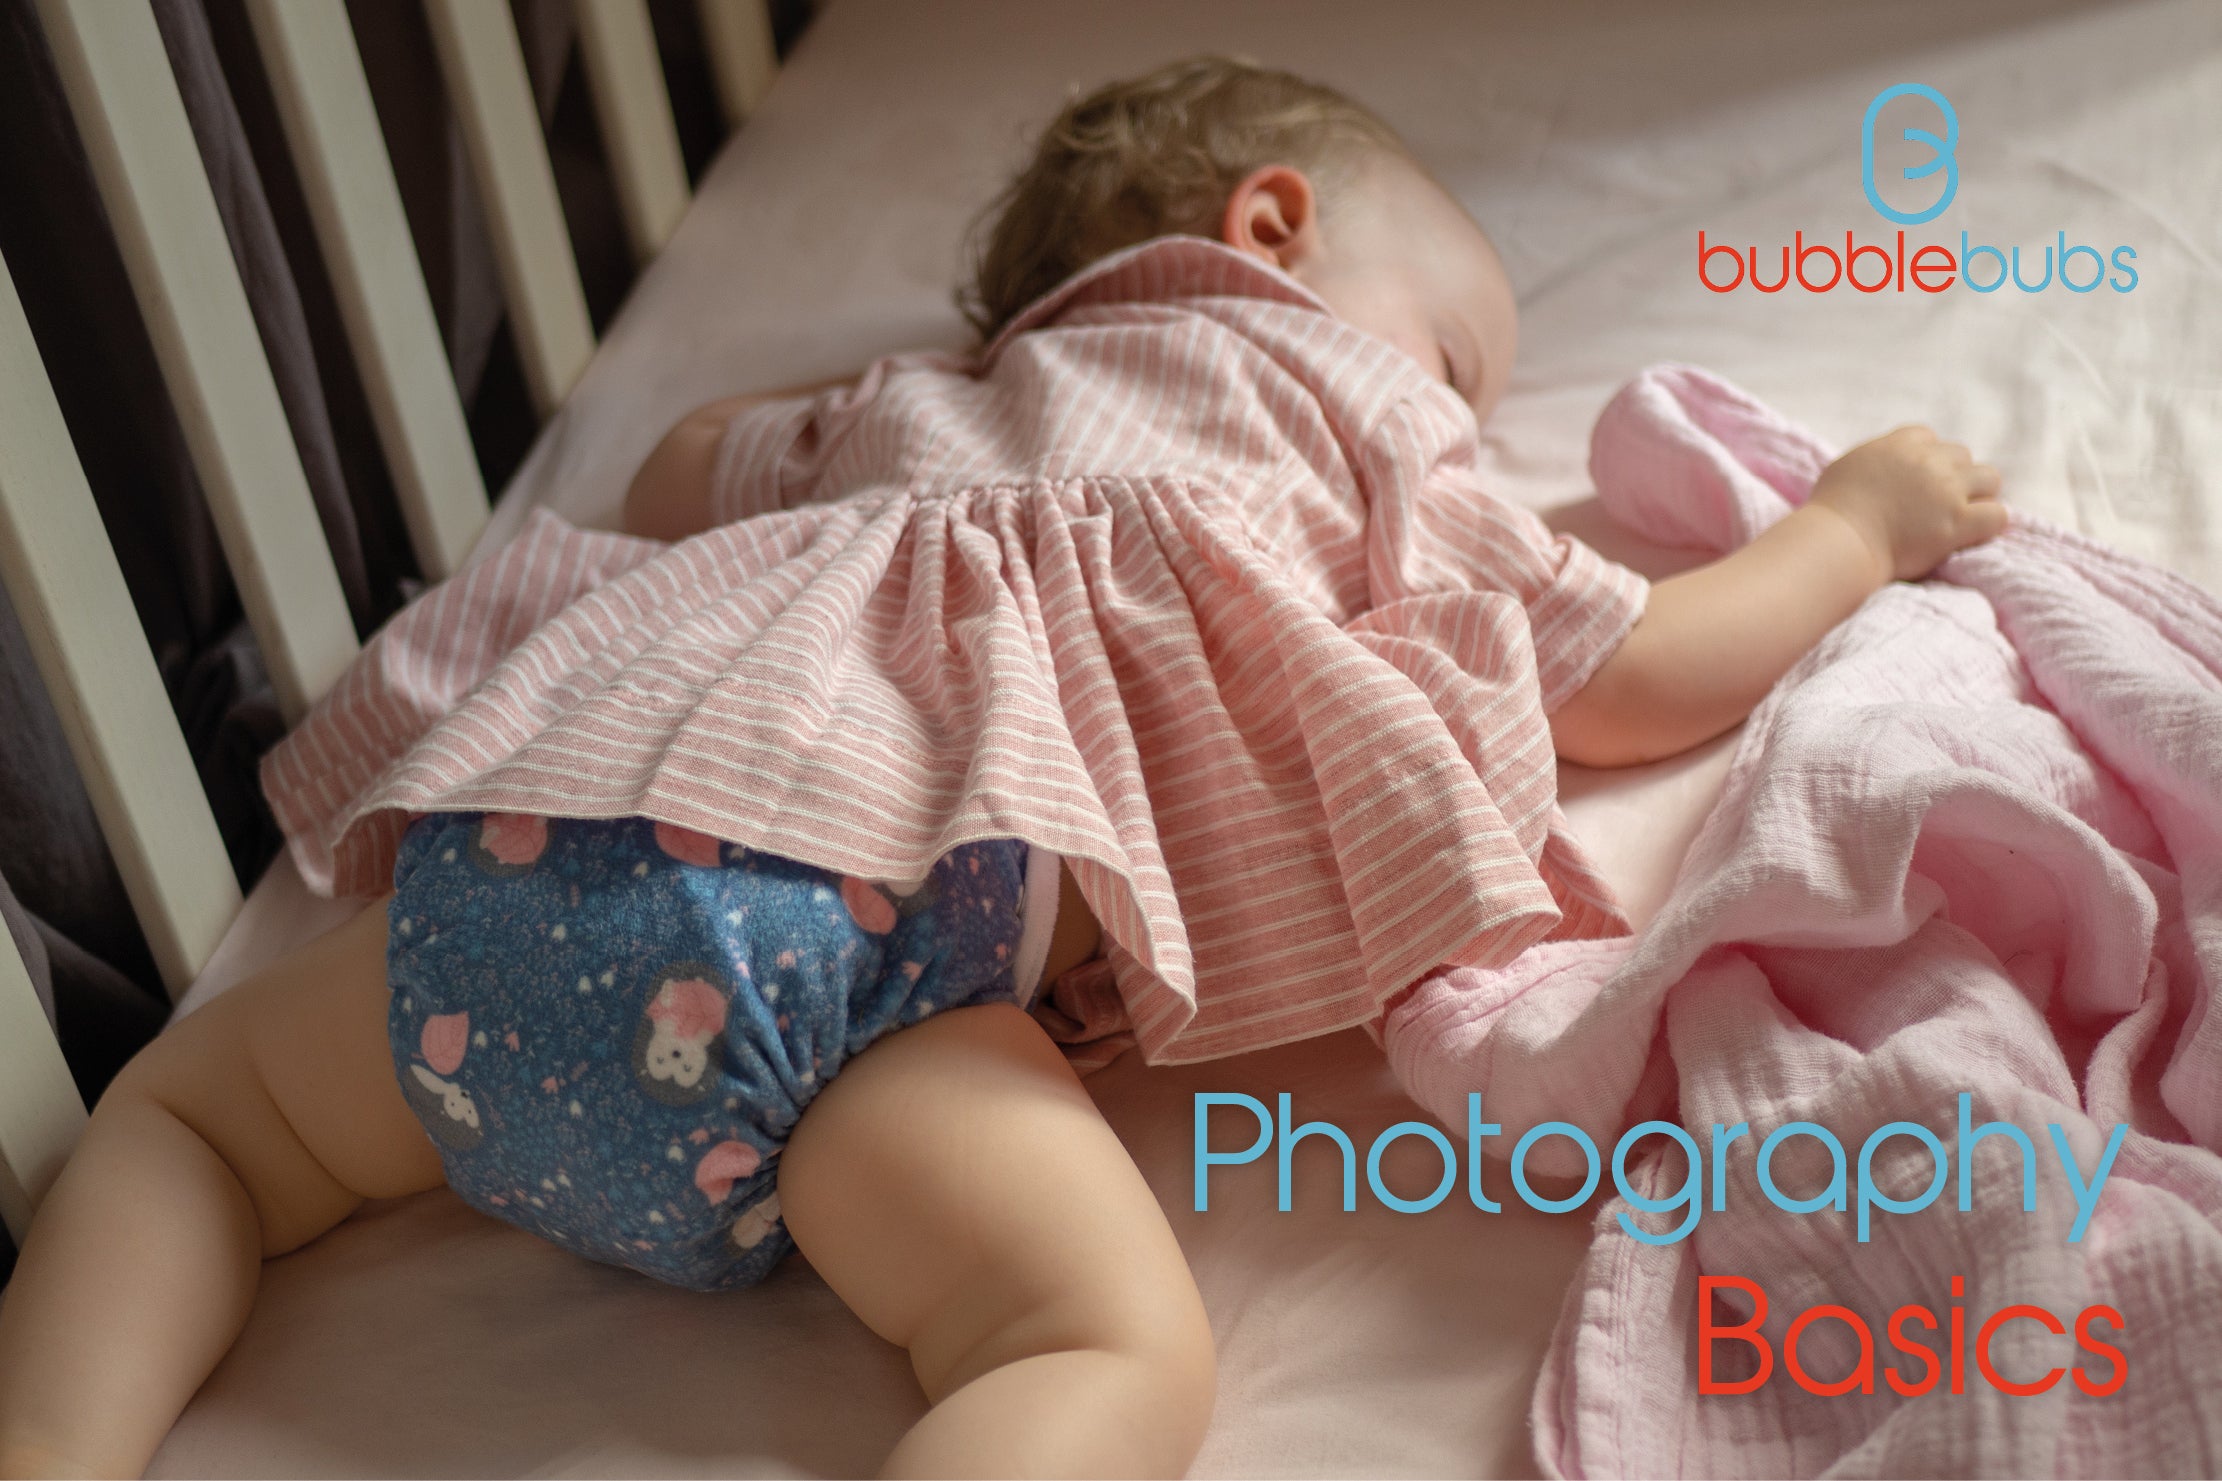 Do enjoy having your photos taken wearing cloth nappies and